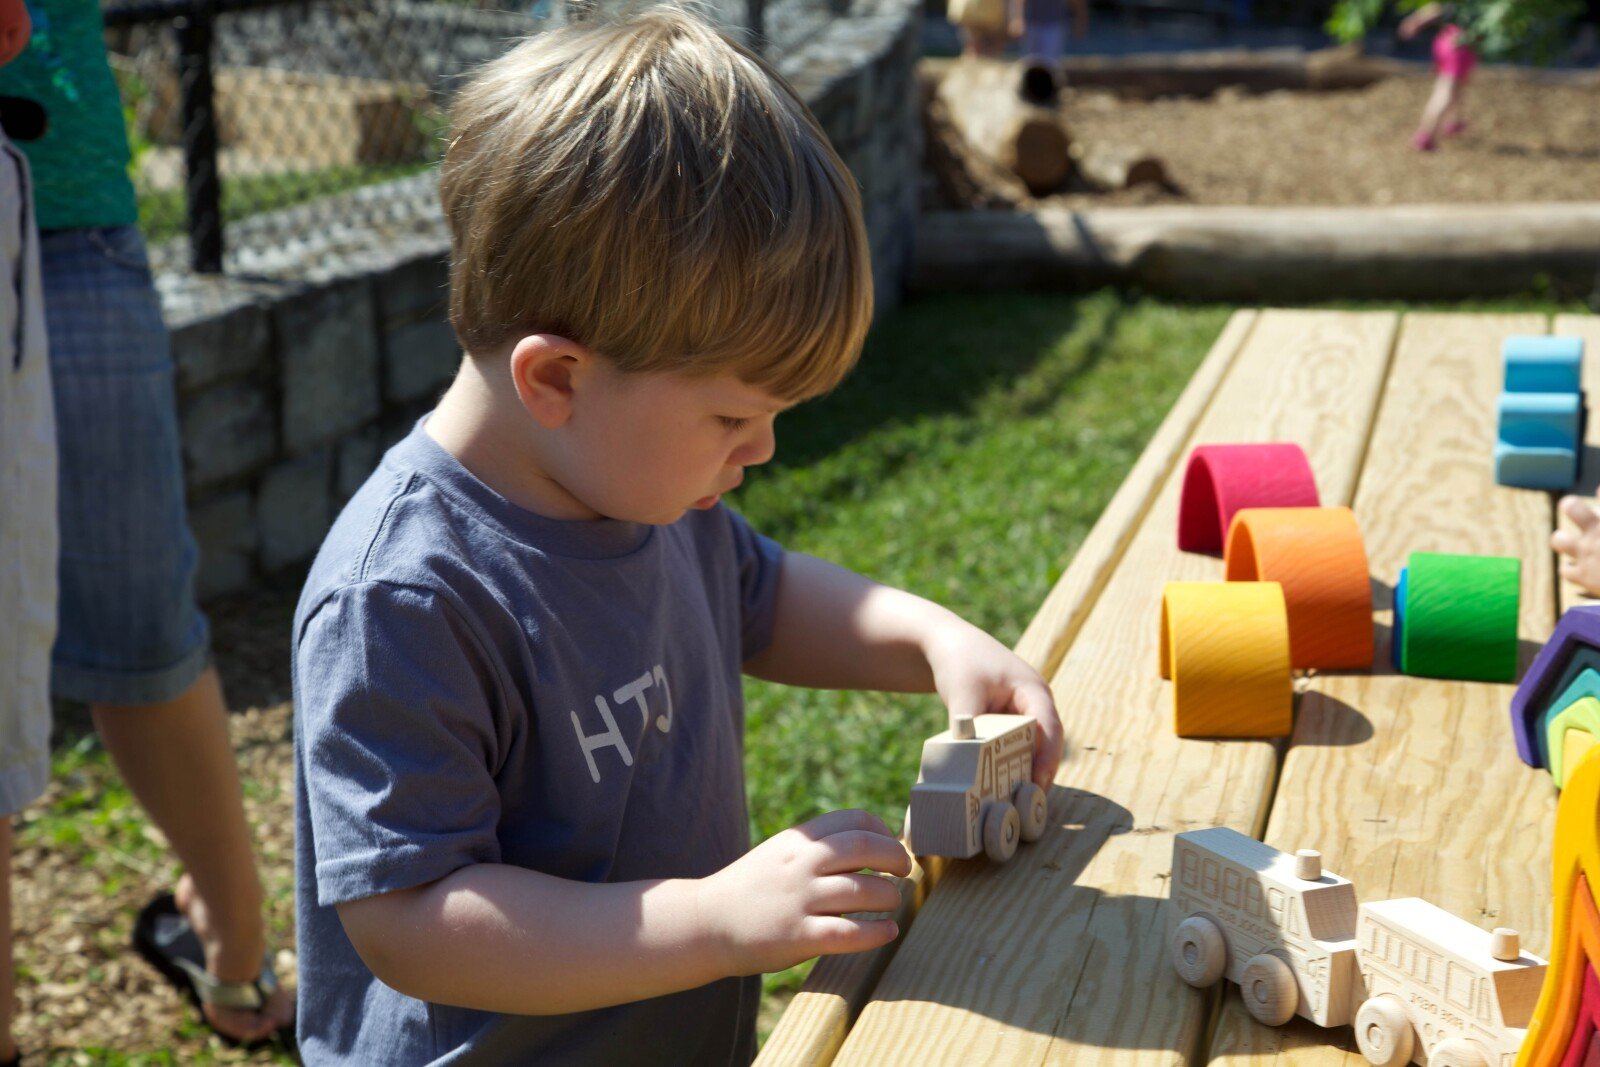 Preschooler playing outside with toy blocks